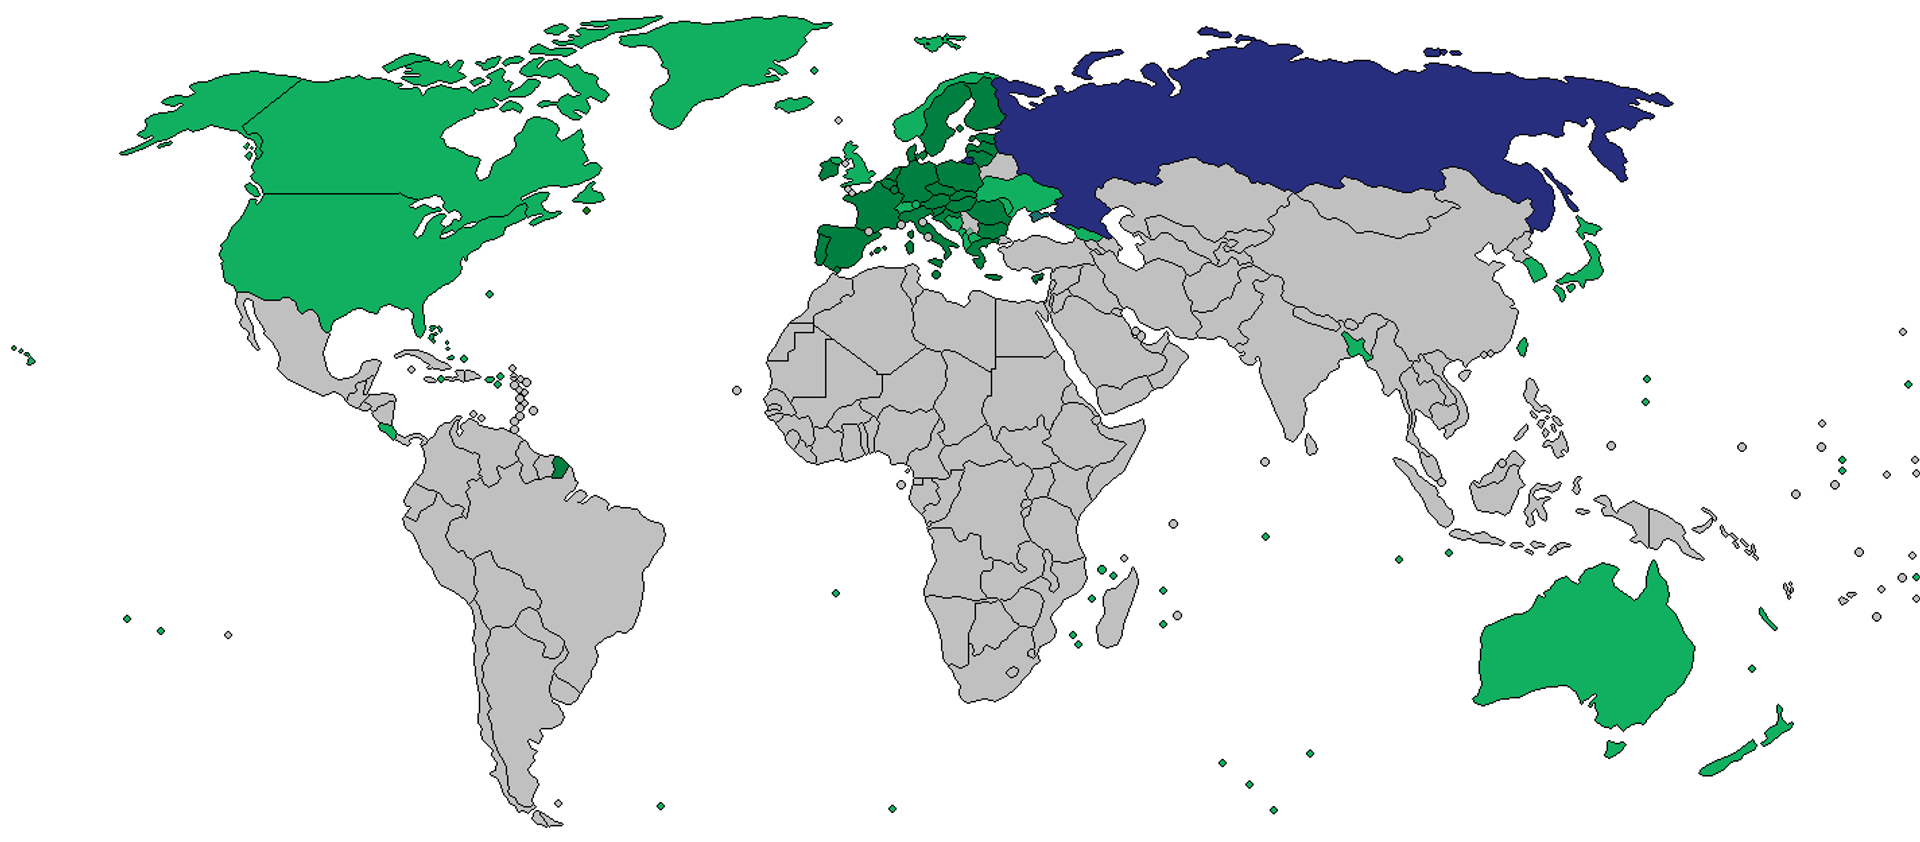 Map showing countries which have slapped sanctions on Russia (in green) after the escalation of the Donbass crisis into a full-blown NATO-Russia proxy war in Ukraine. The image shows that the vast majority of nations in the so-called Global South refrained from introducing restrictions on Moscow. - Sputnik International, 1920, 17.08.2023